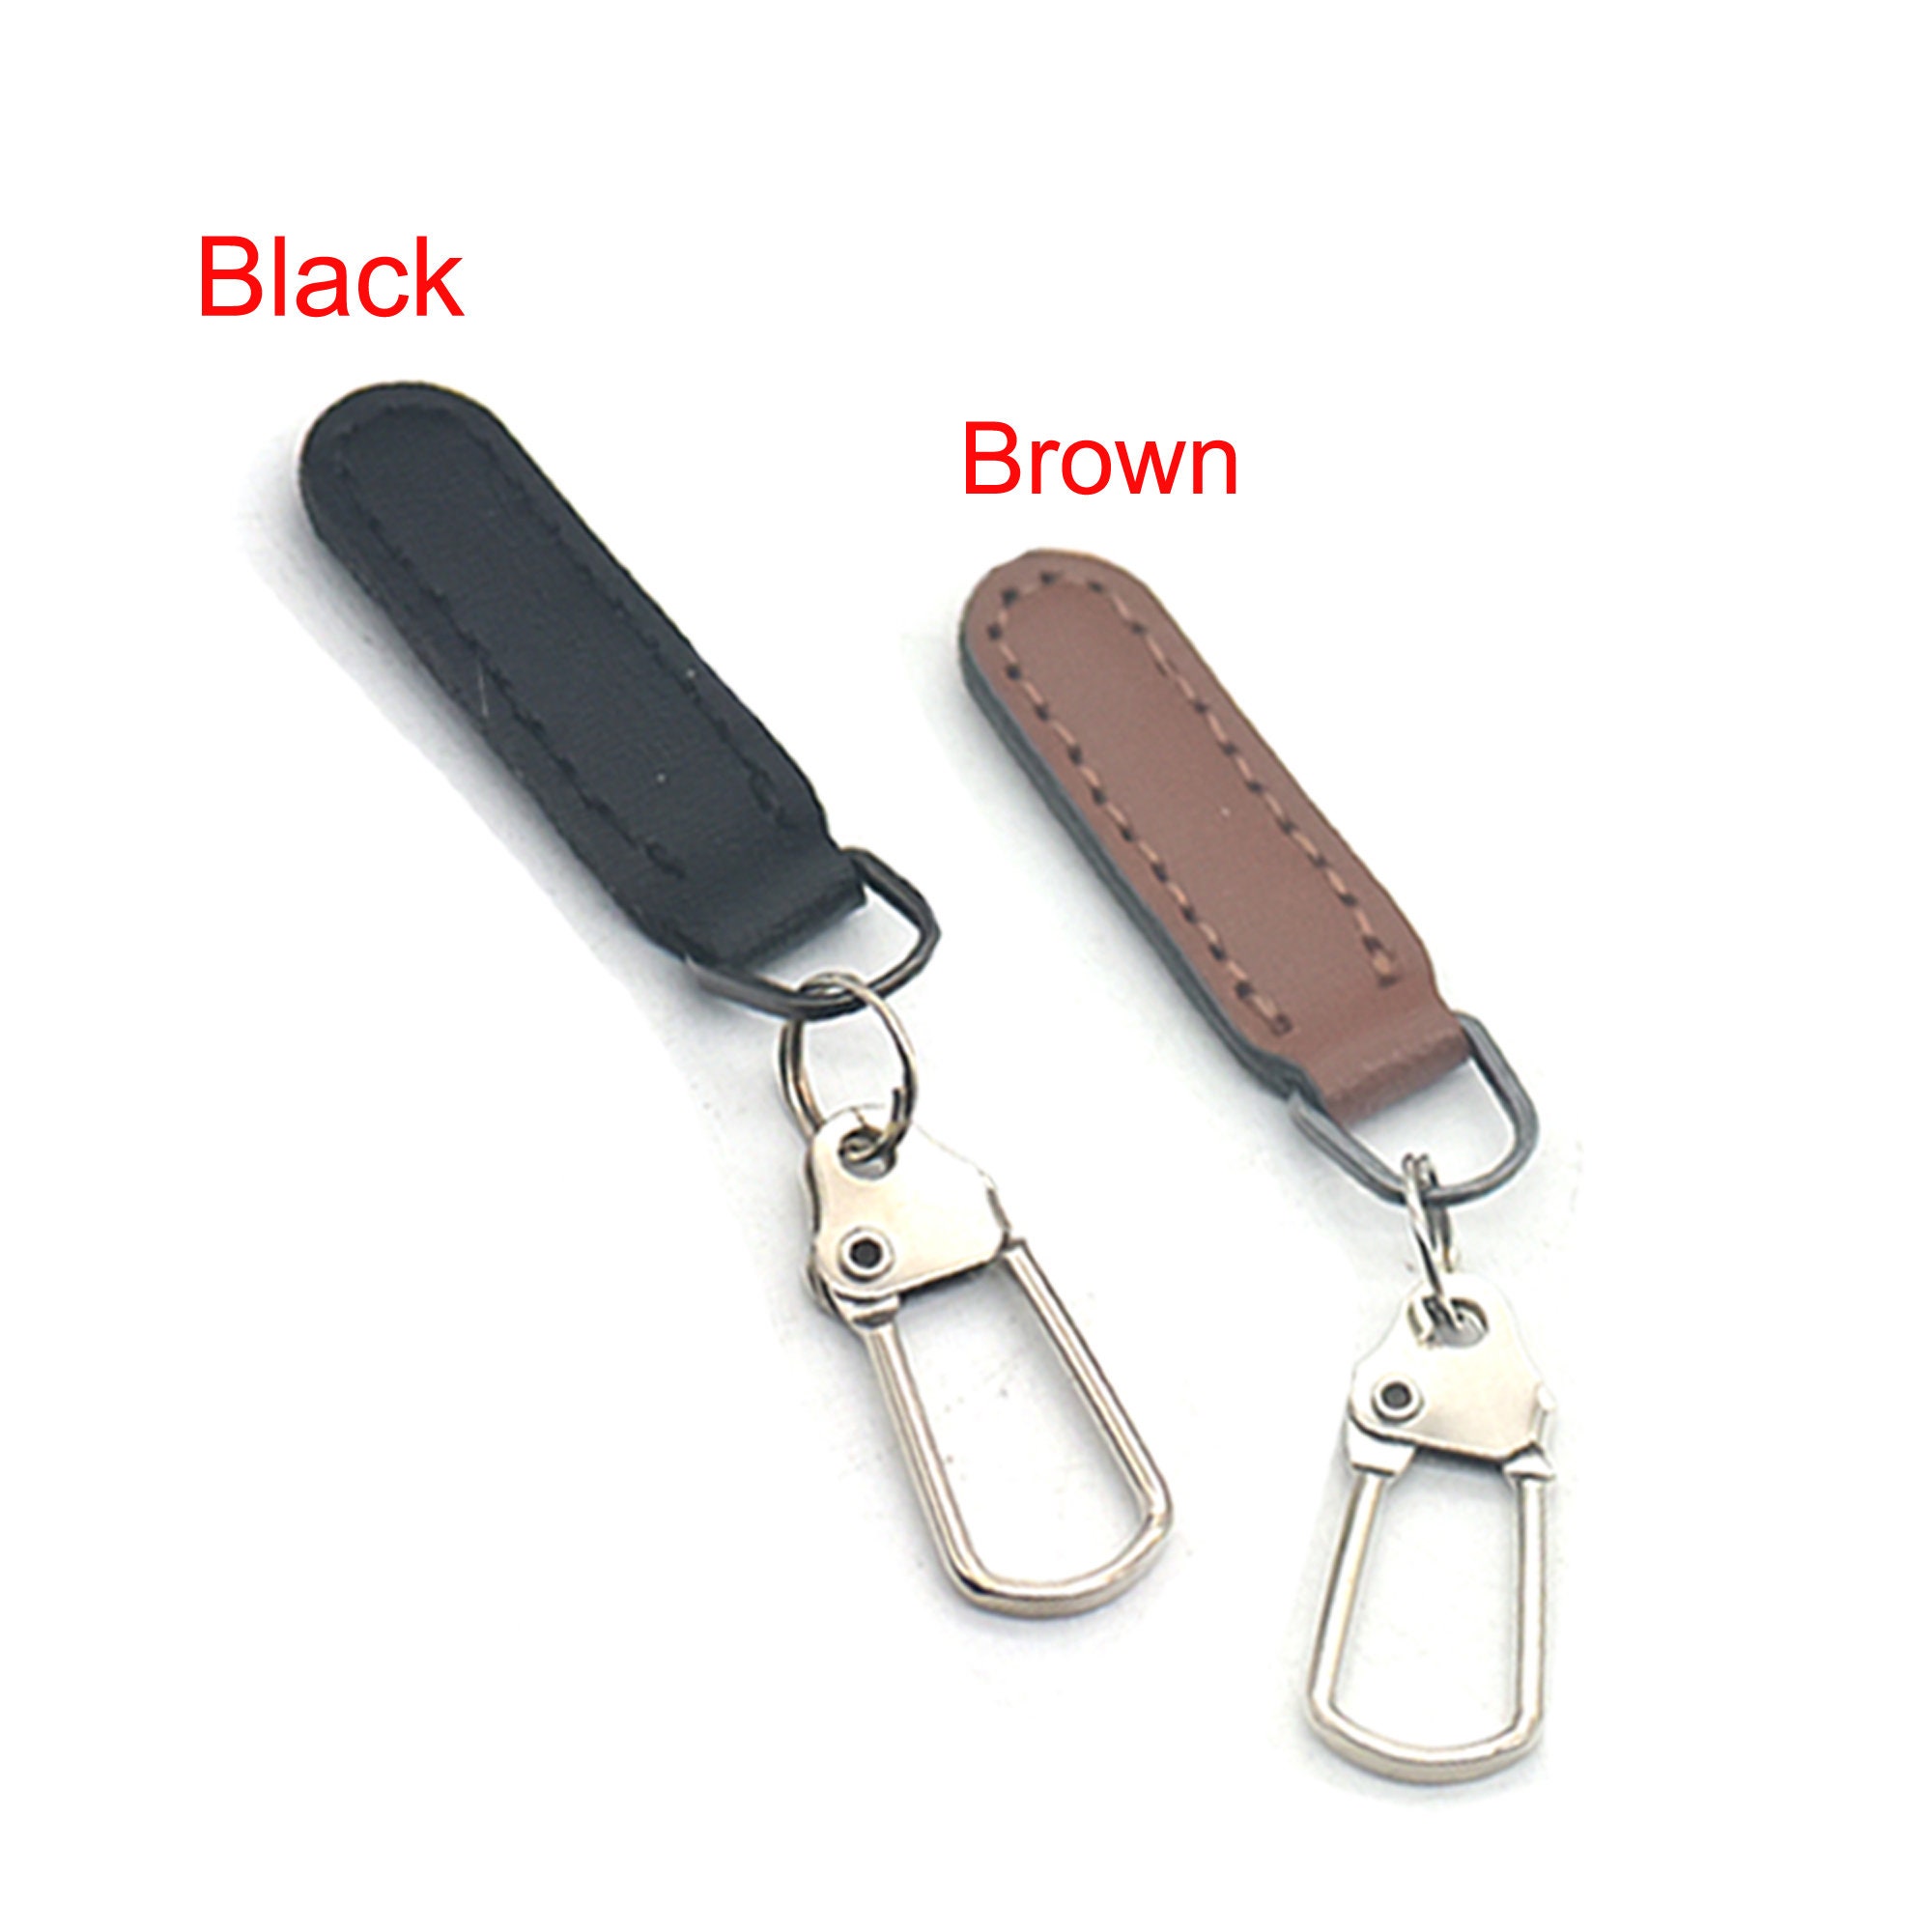 6x Zipper Pull Tab Fixer Zipper Tags DIY Leather Replacement Durable Repair  for